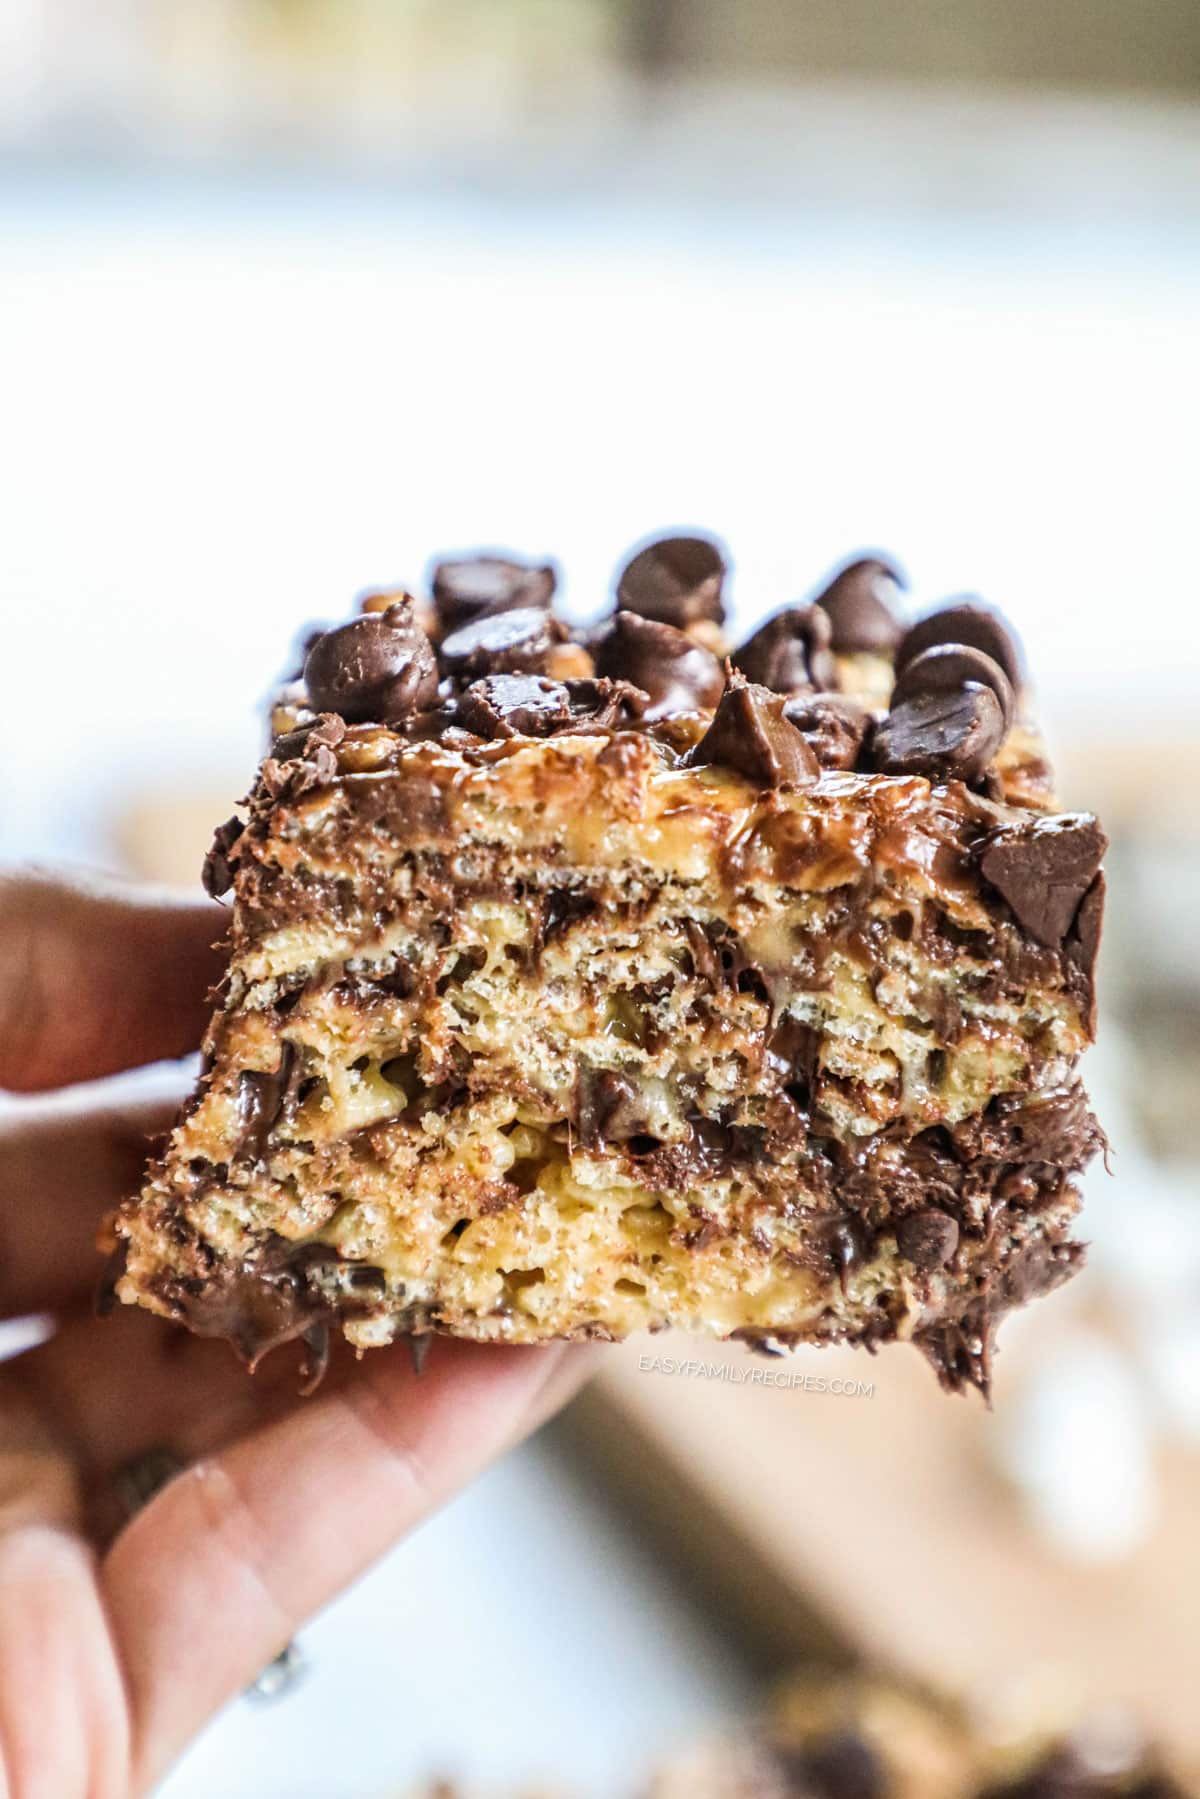 Holding a big, thick peanut butter chocolate rice krispie treat topped with chocolate chips